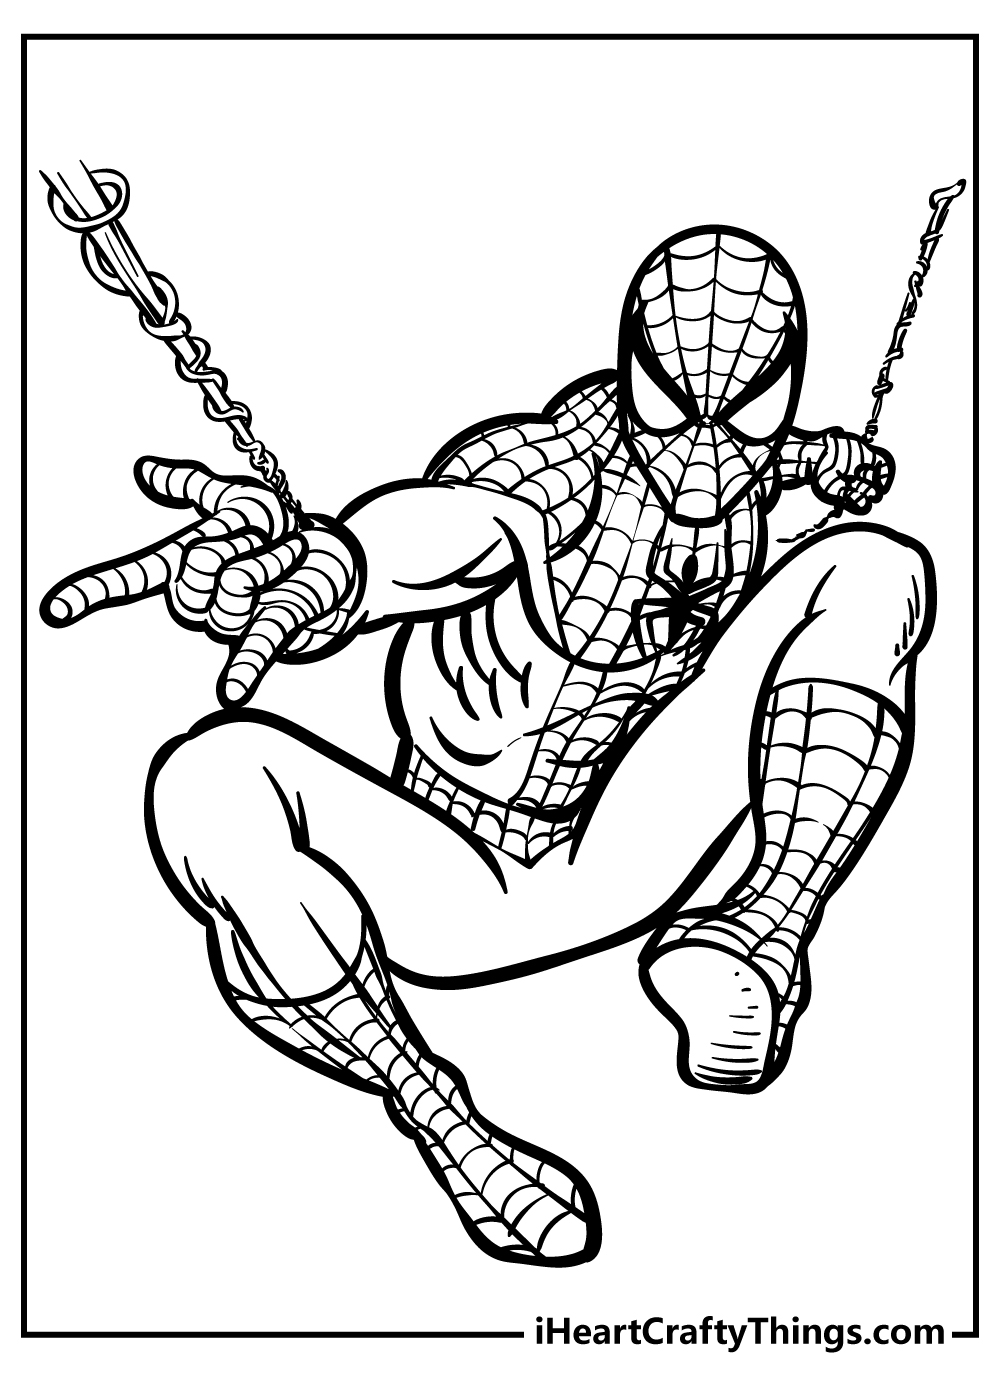 Spider-Man Coloring Pages for preschoolers free printable